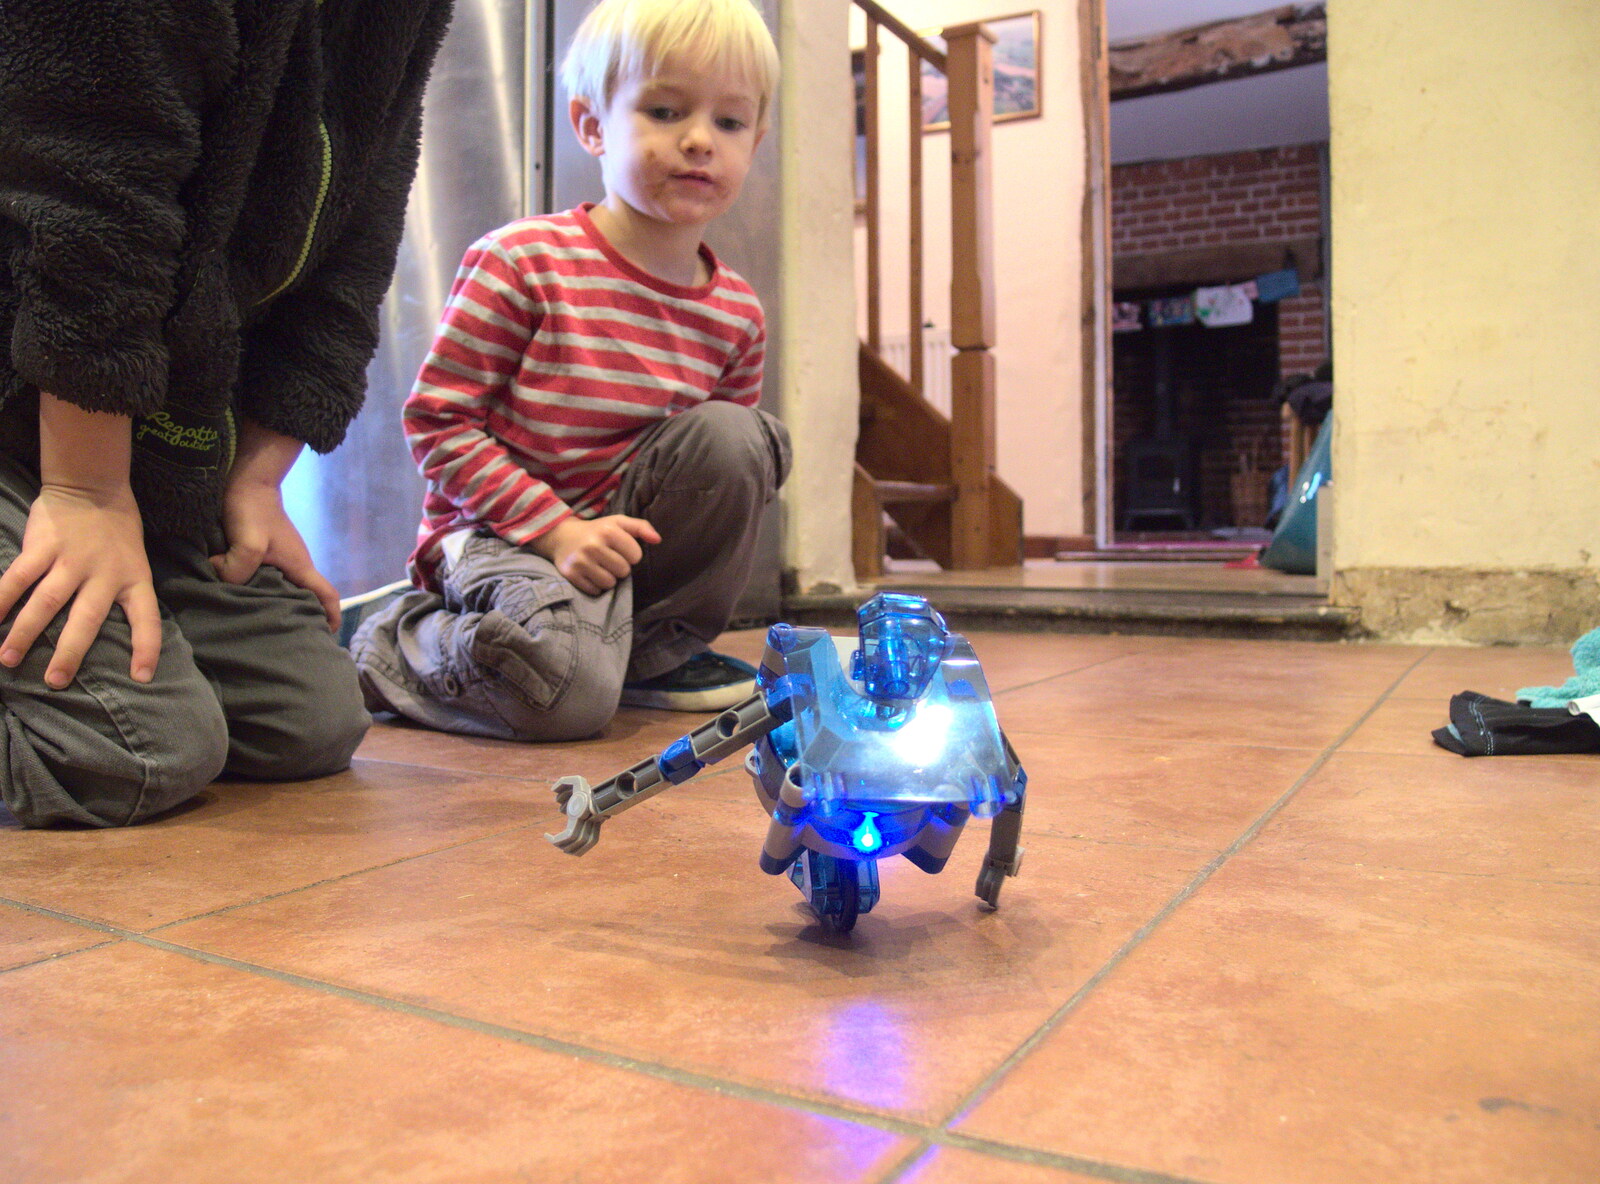 Fred's Gyrobot trundles around the kitchen floor from Fred's Gyrobot, Brome, Suffolk - 18th October 2015